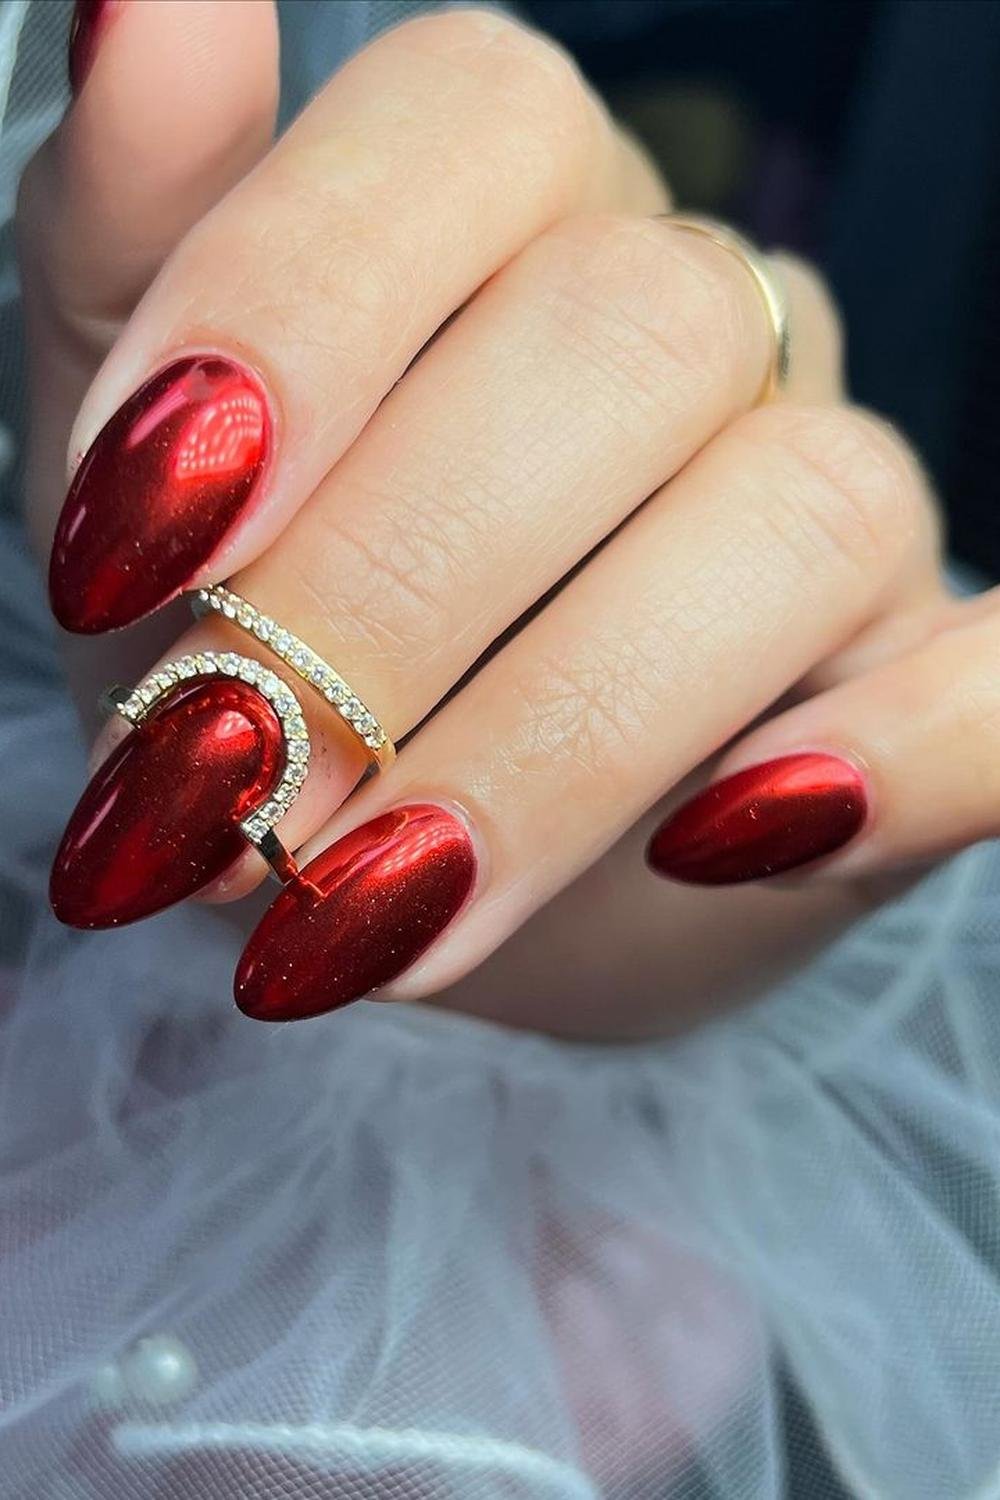 2 - Picture of Red Chrome Nails